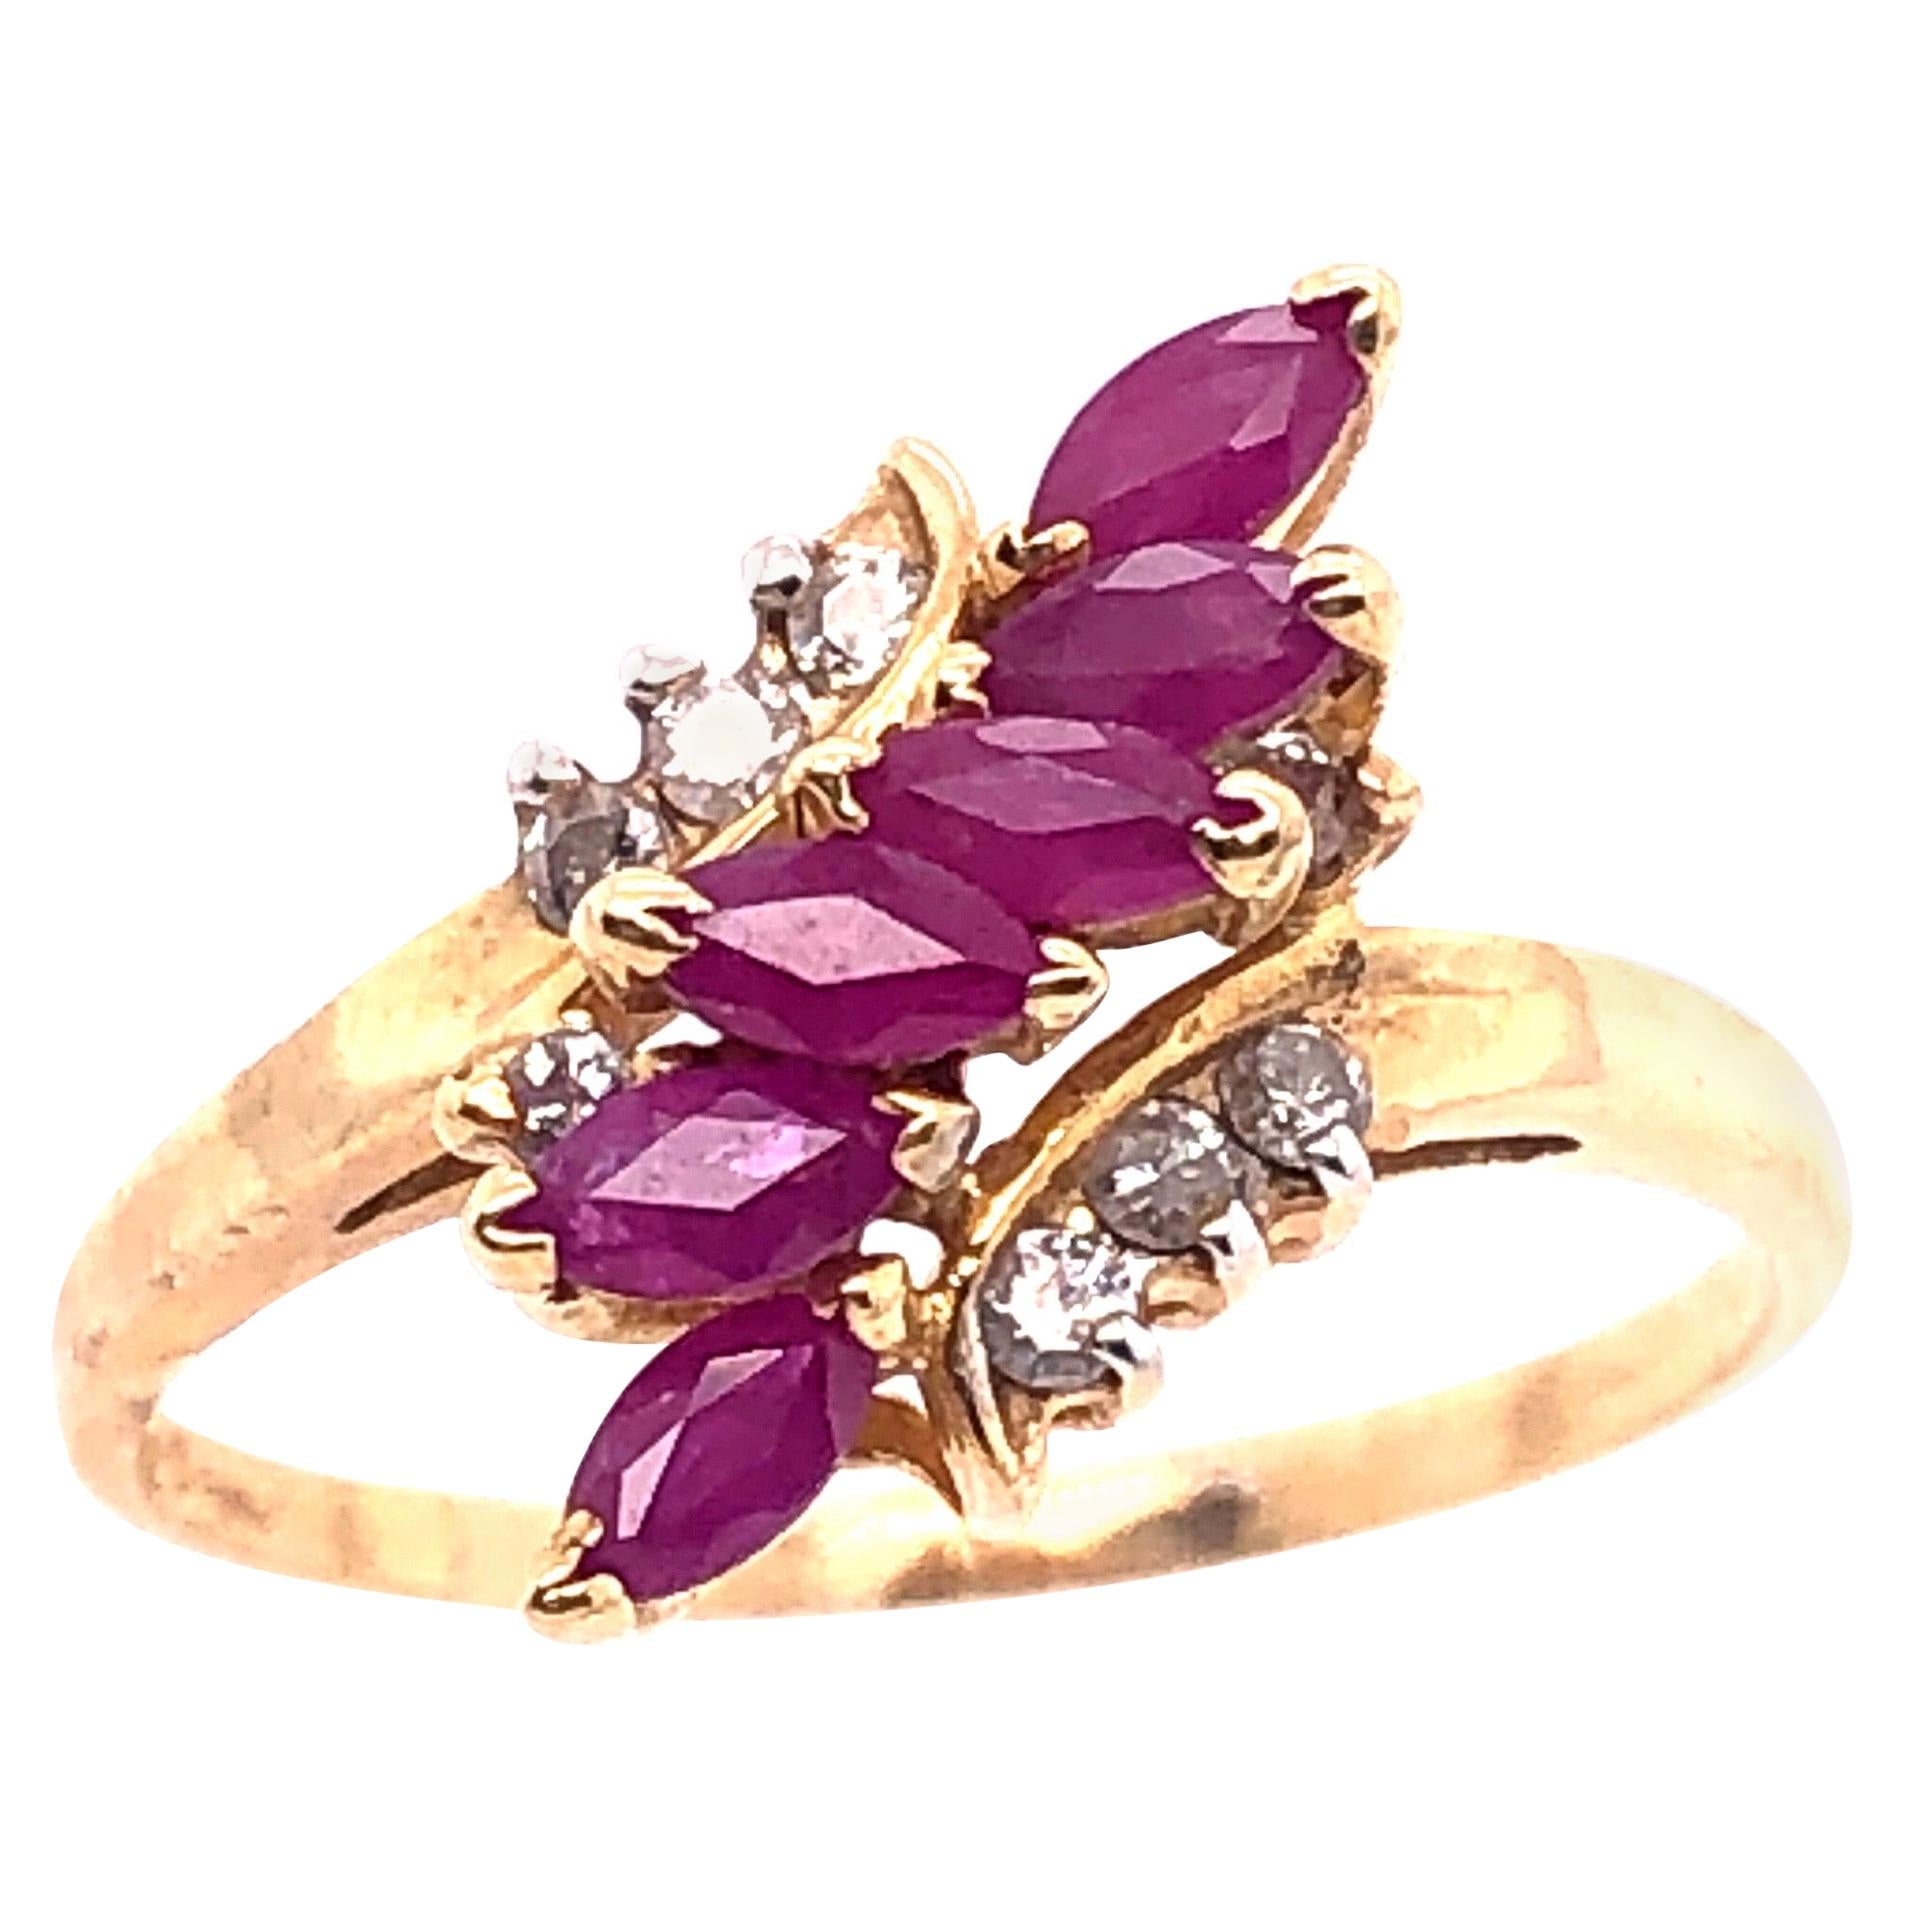 14 Karat Yellow Gold Contemporary Ruby Ring with Diamond Accents